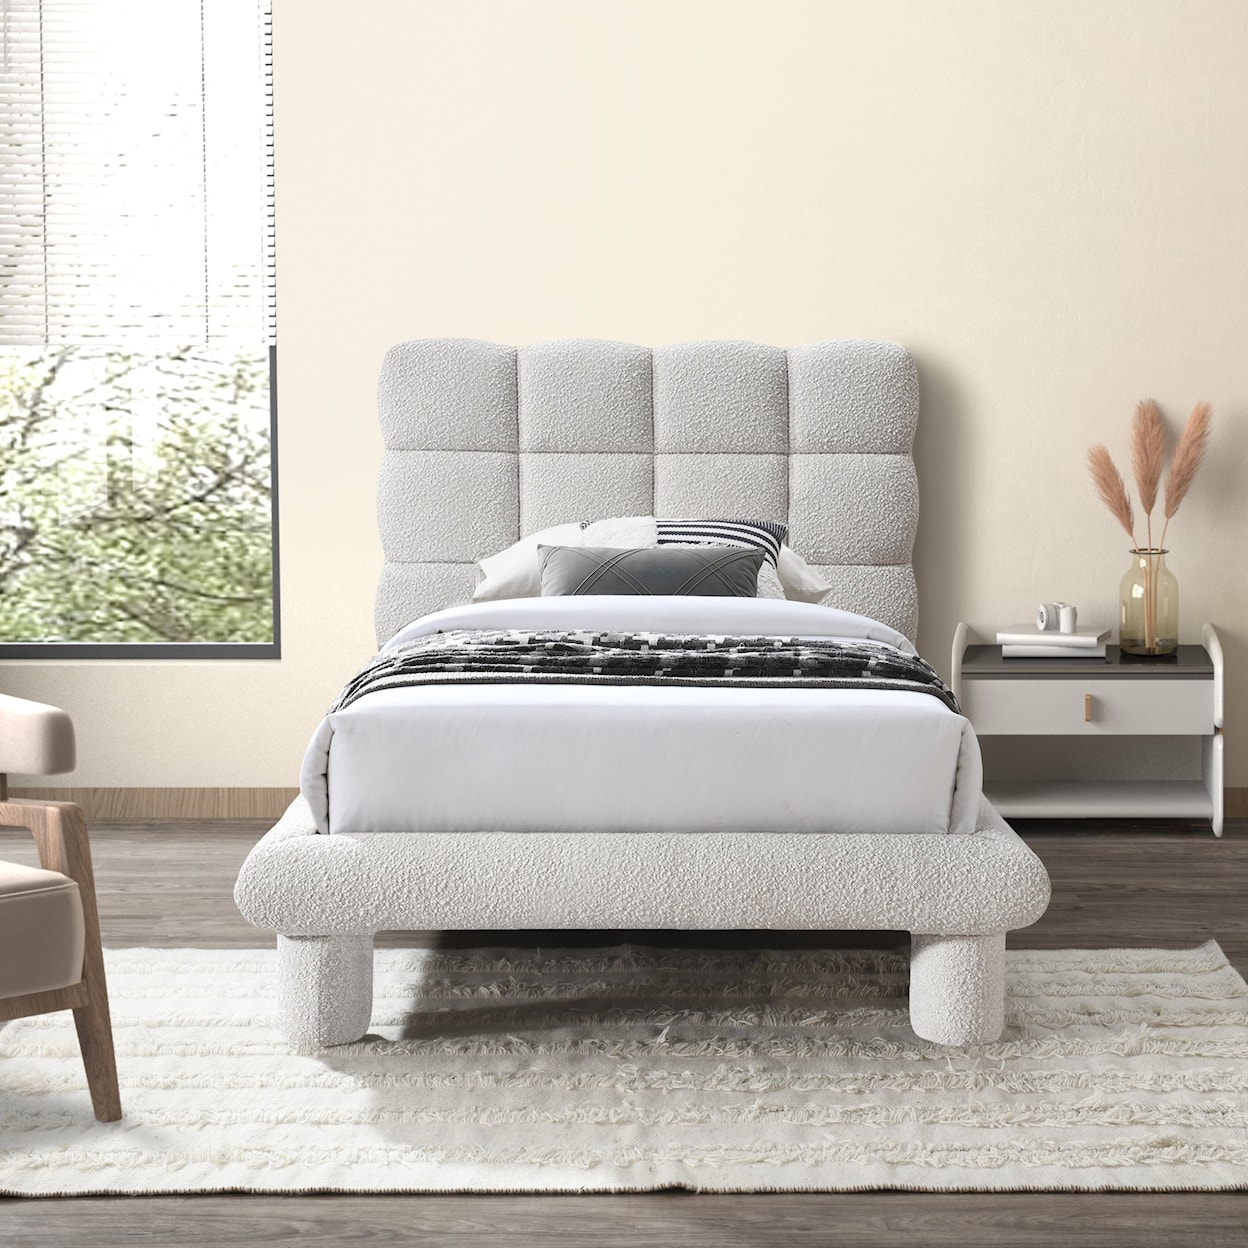 Meridian Furniture Deco Twin Bed (3 Boxes)